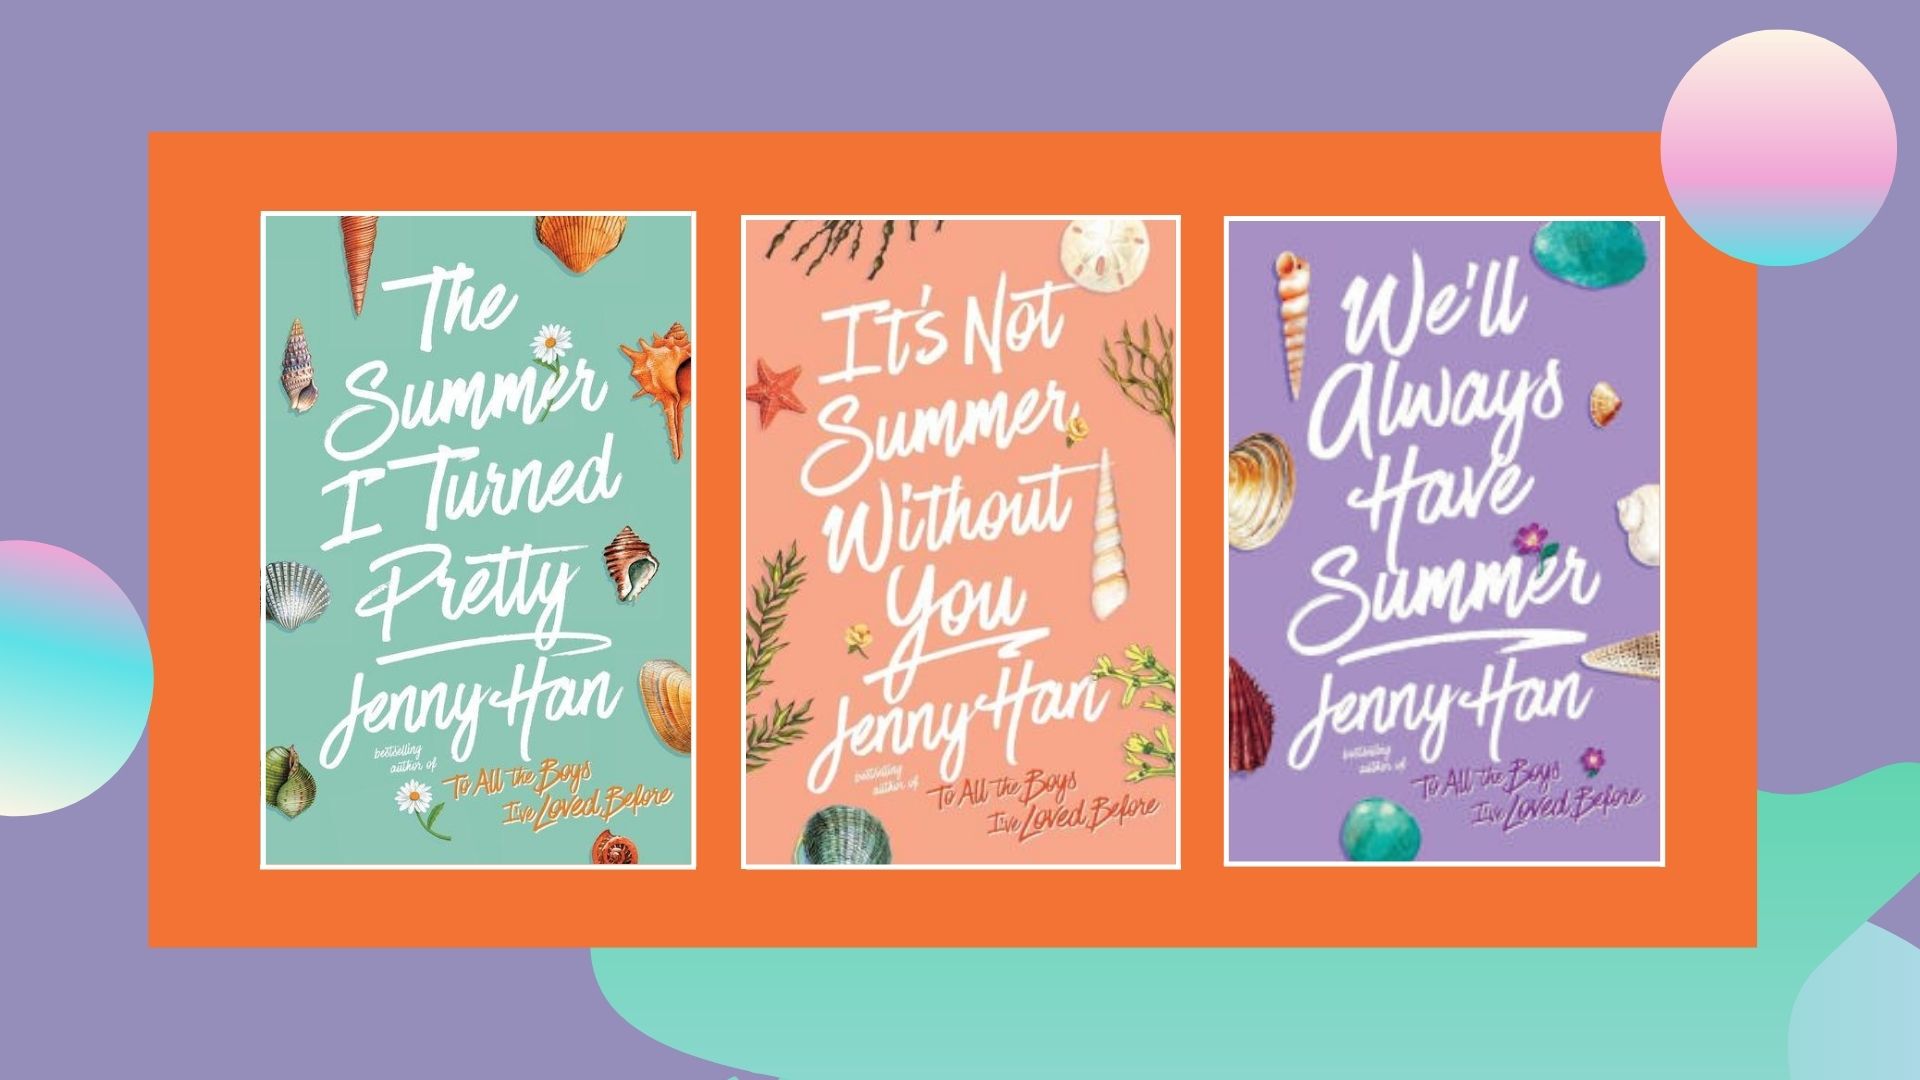 Summer Book Review: “The Summer I Turned Pretty” Series by Jenny